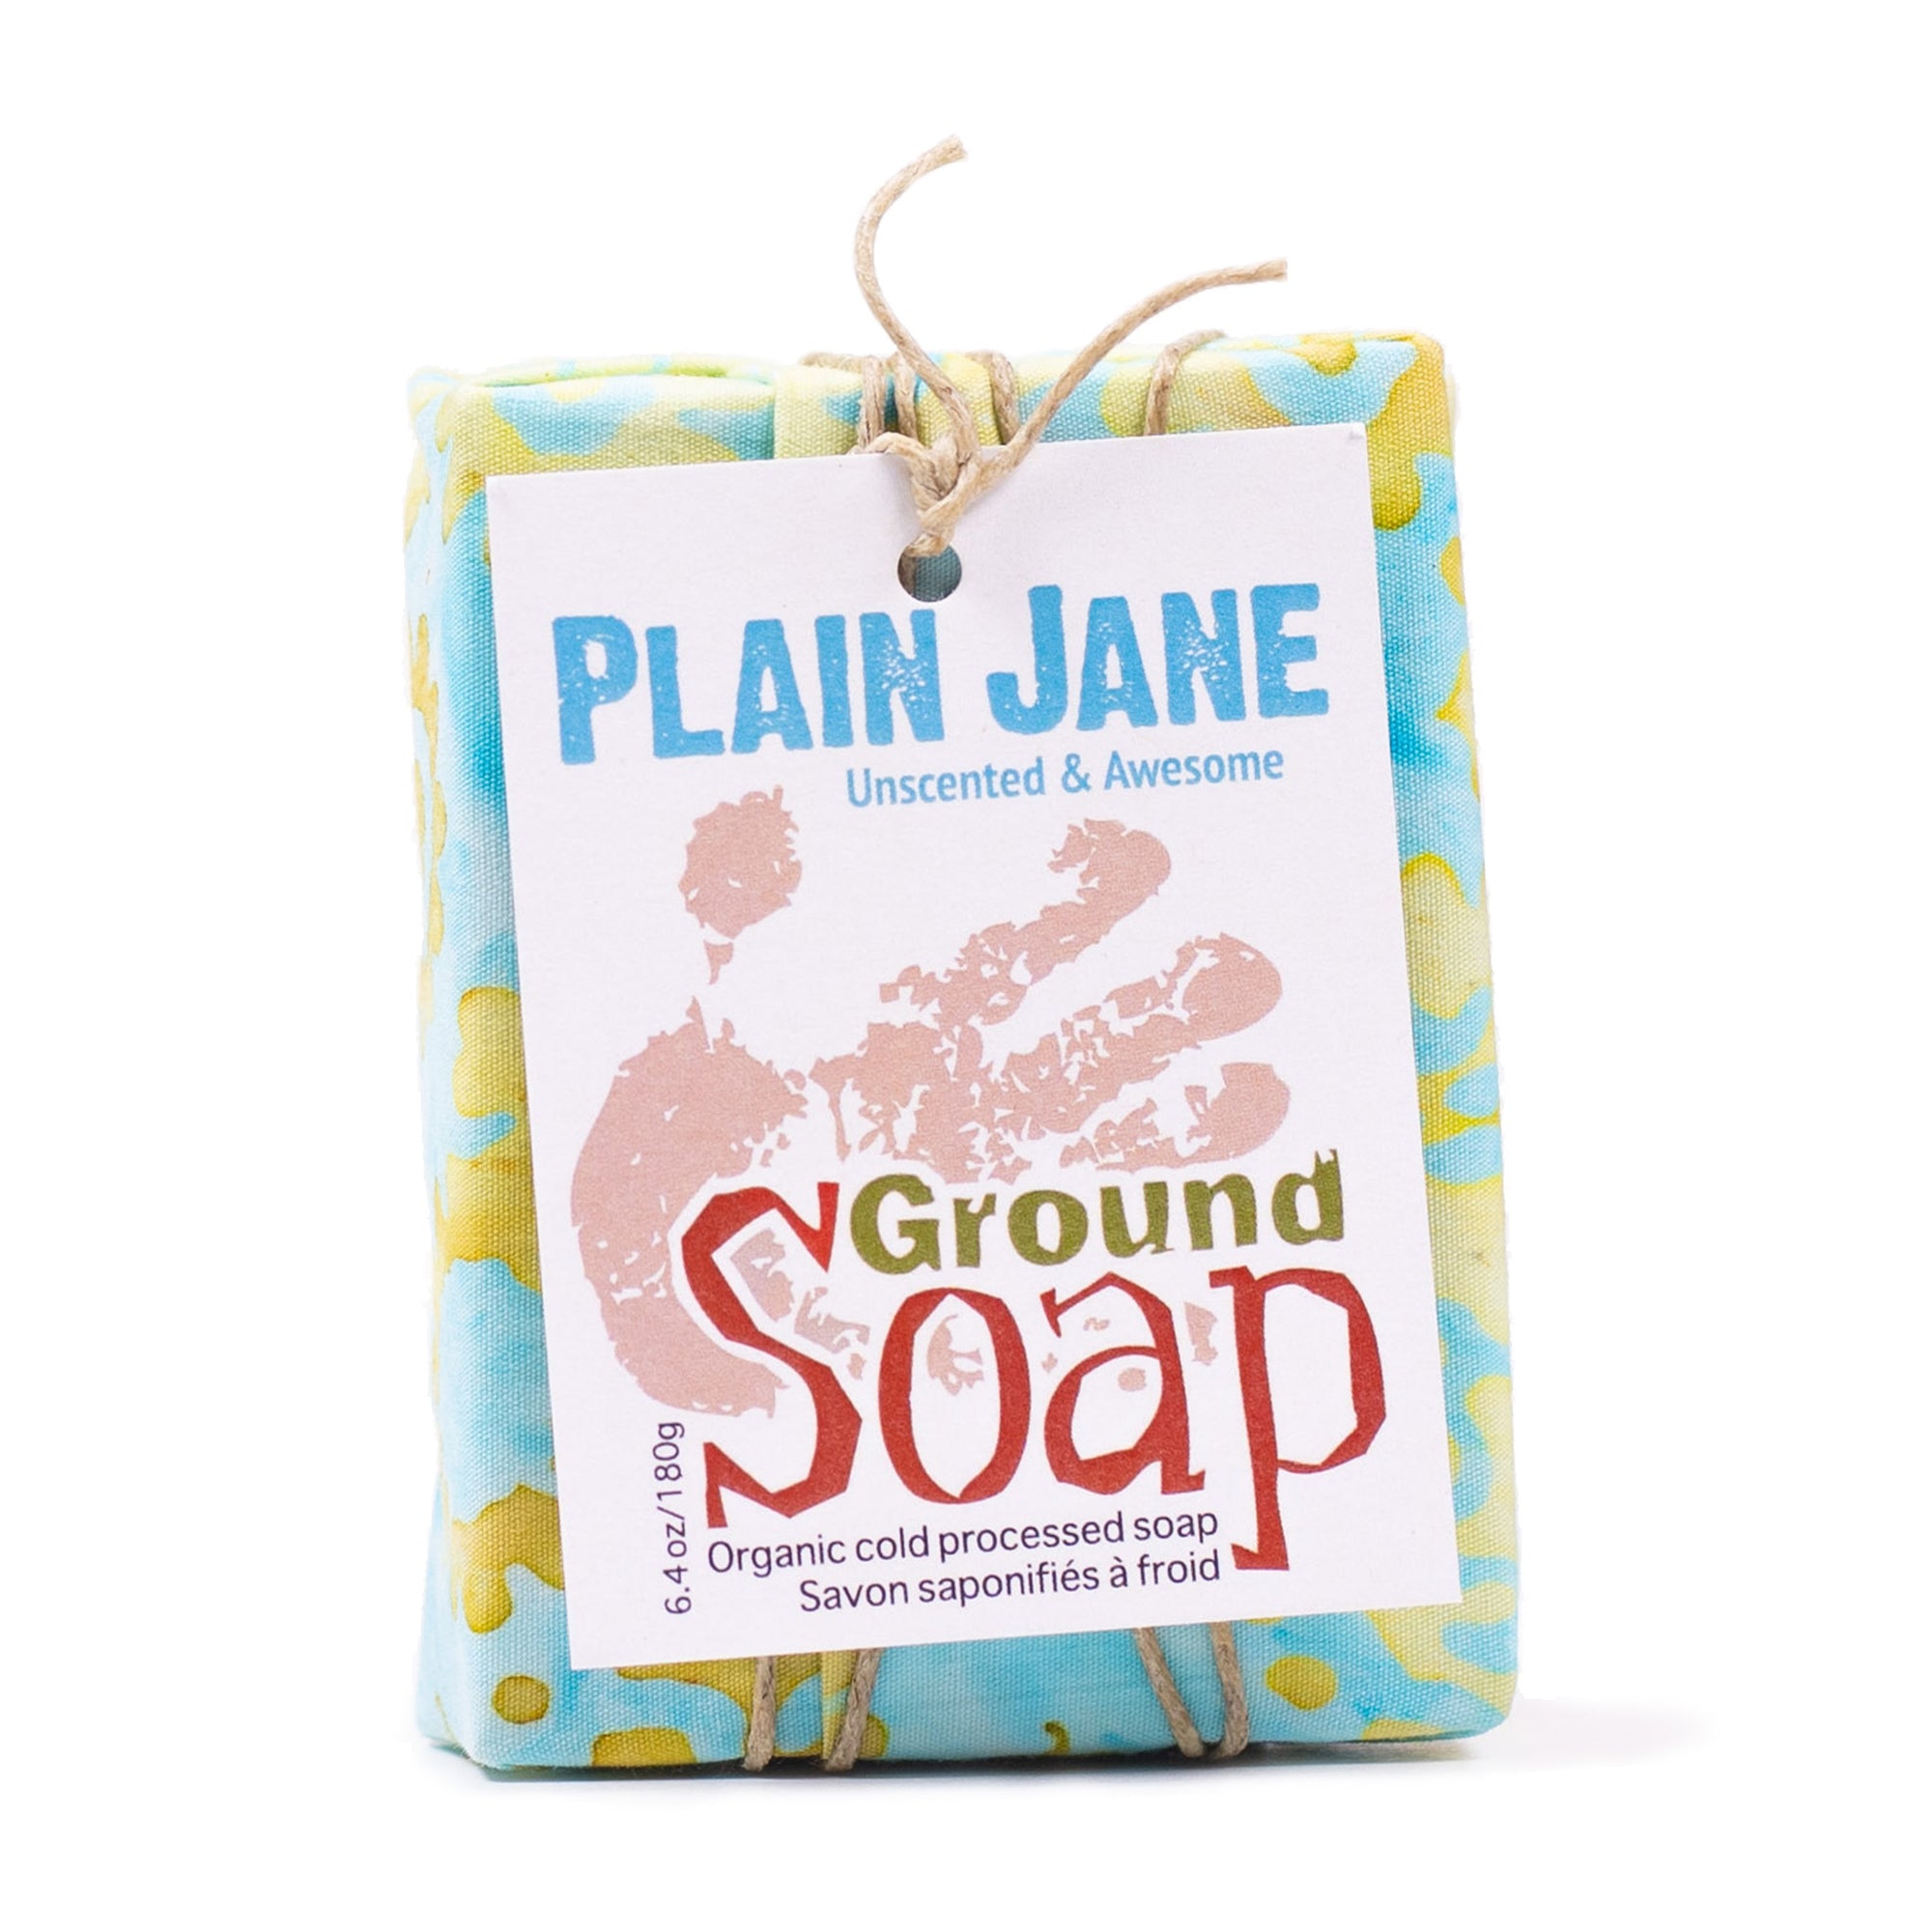 Plain Jane Unscented organic bar soap from ground Soap.